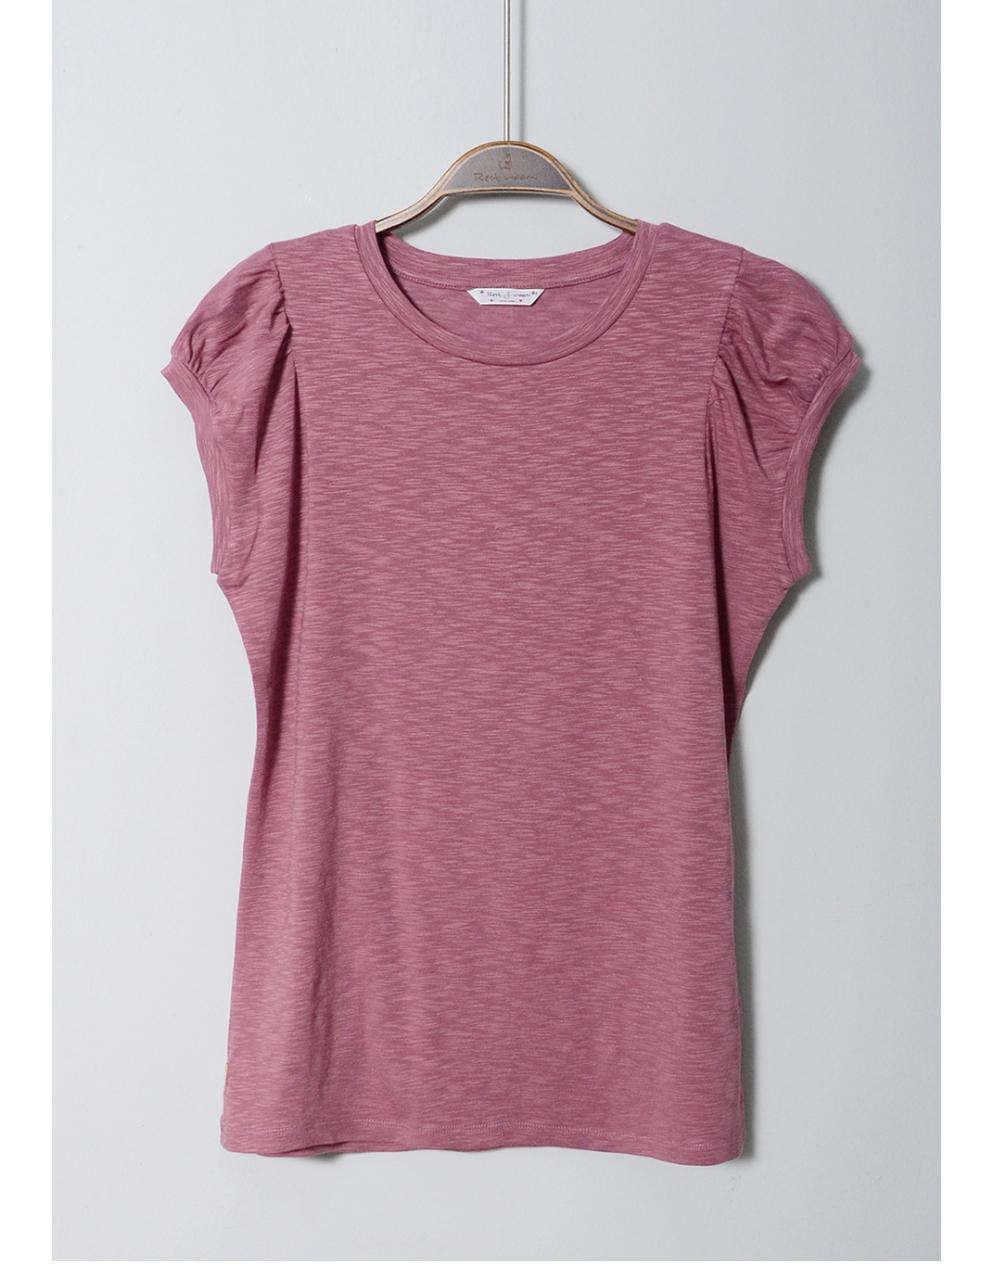 short sleeved tee pink color image-S1L64